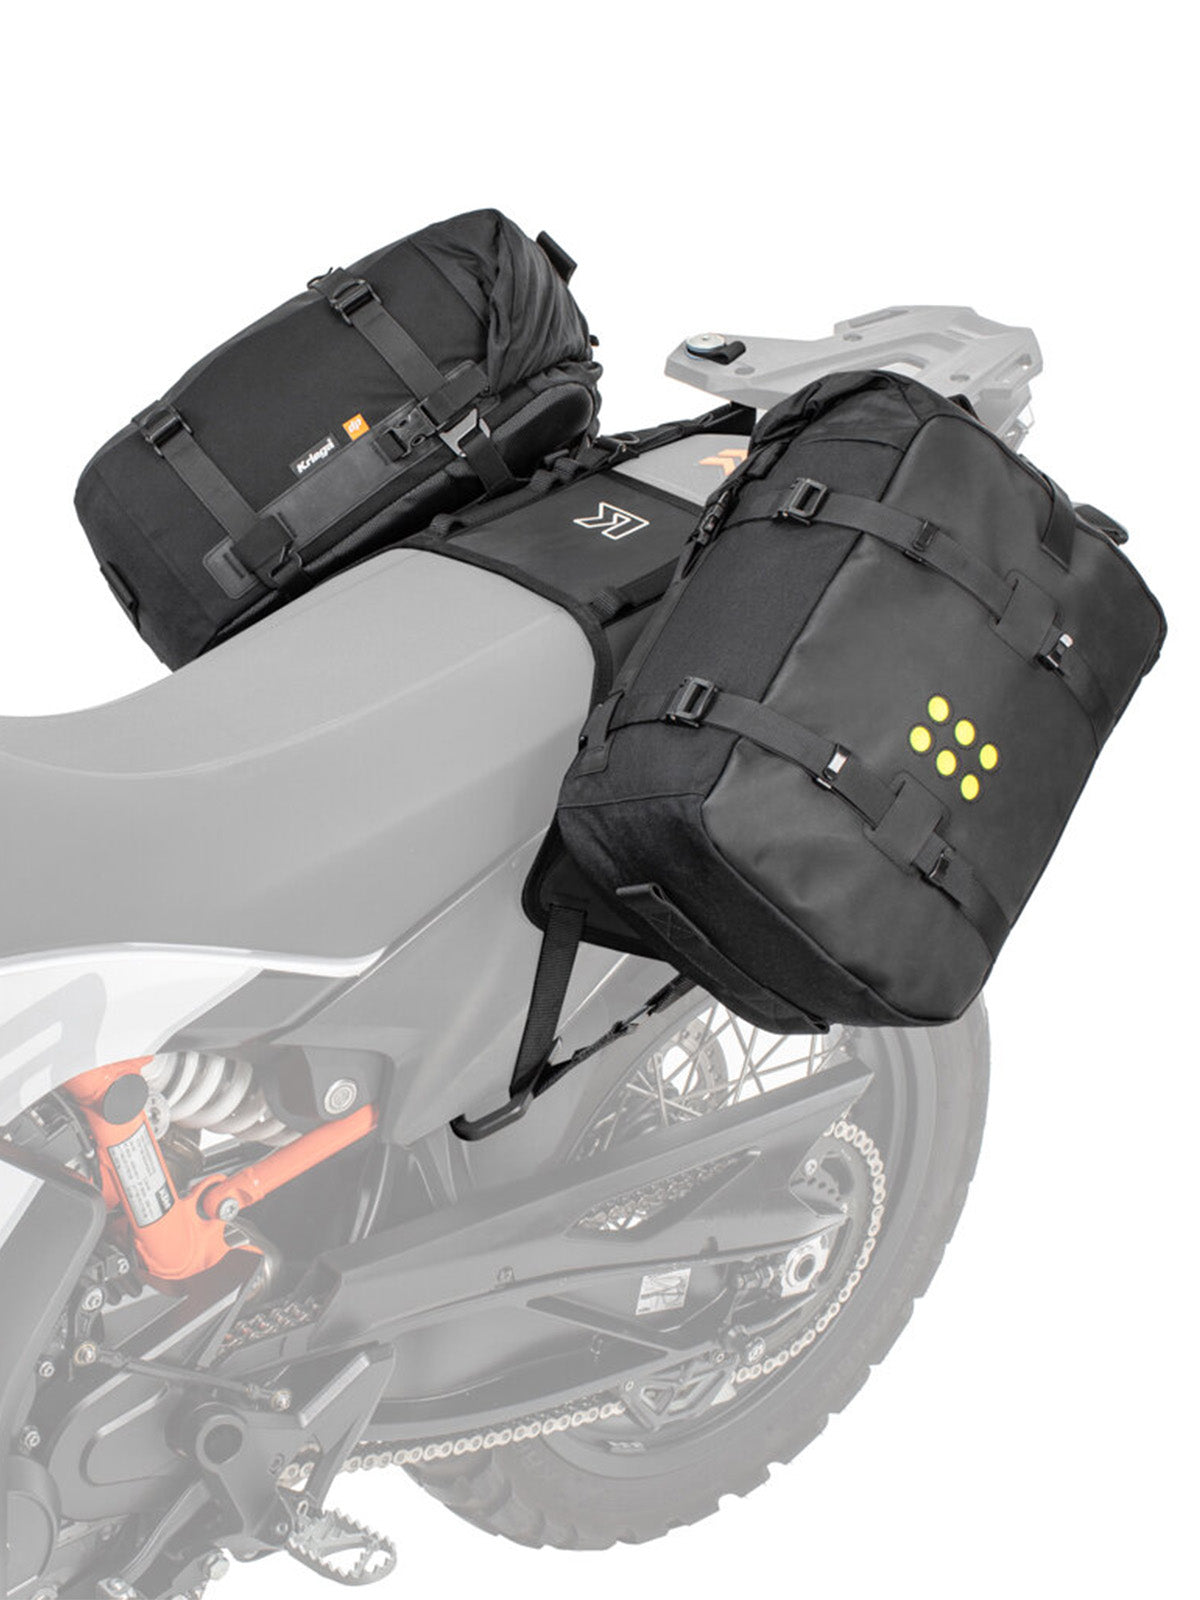 Kriega OS BASE KTM 790/890 with two os18 adventure packs